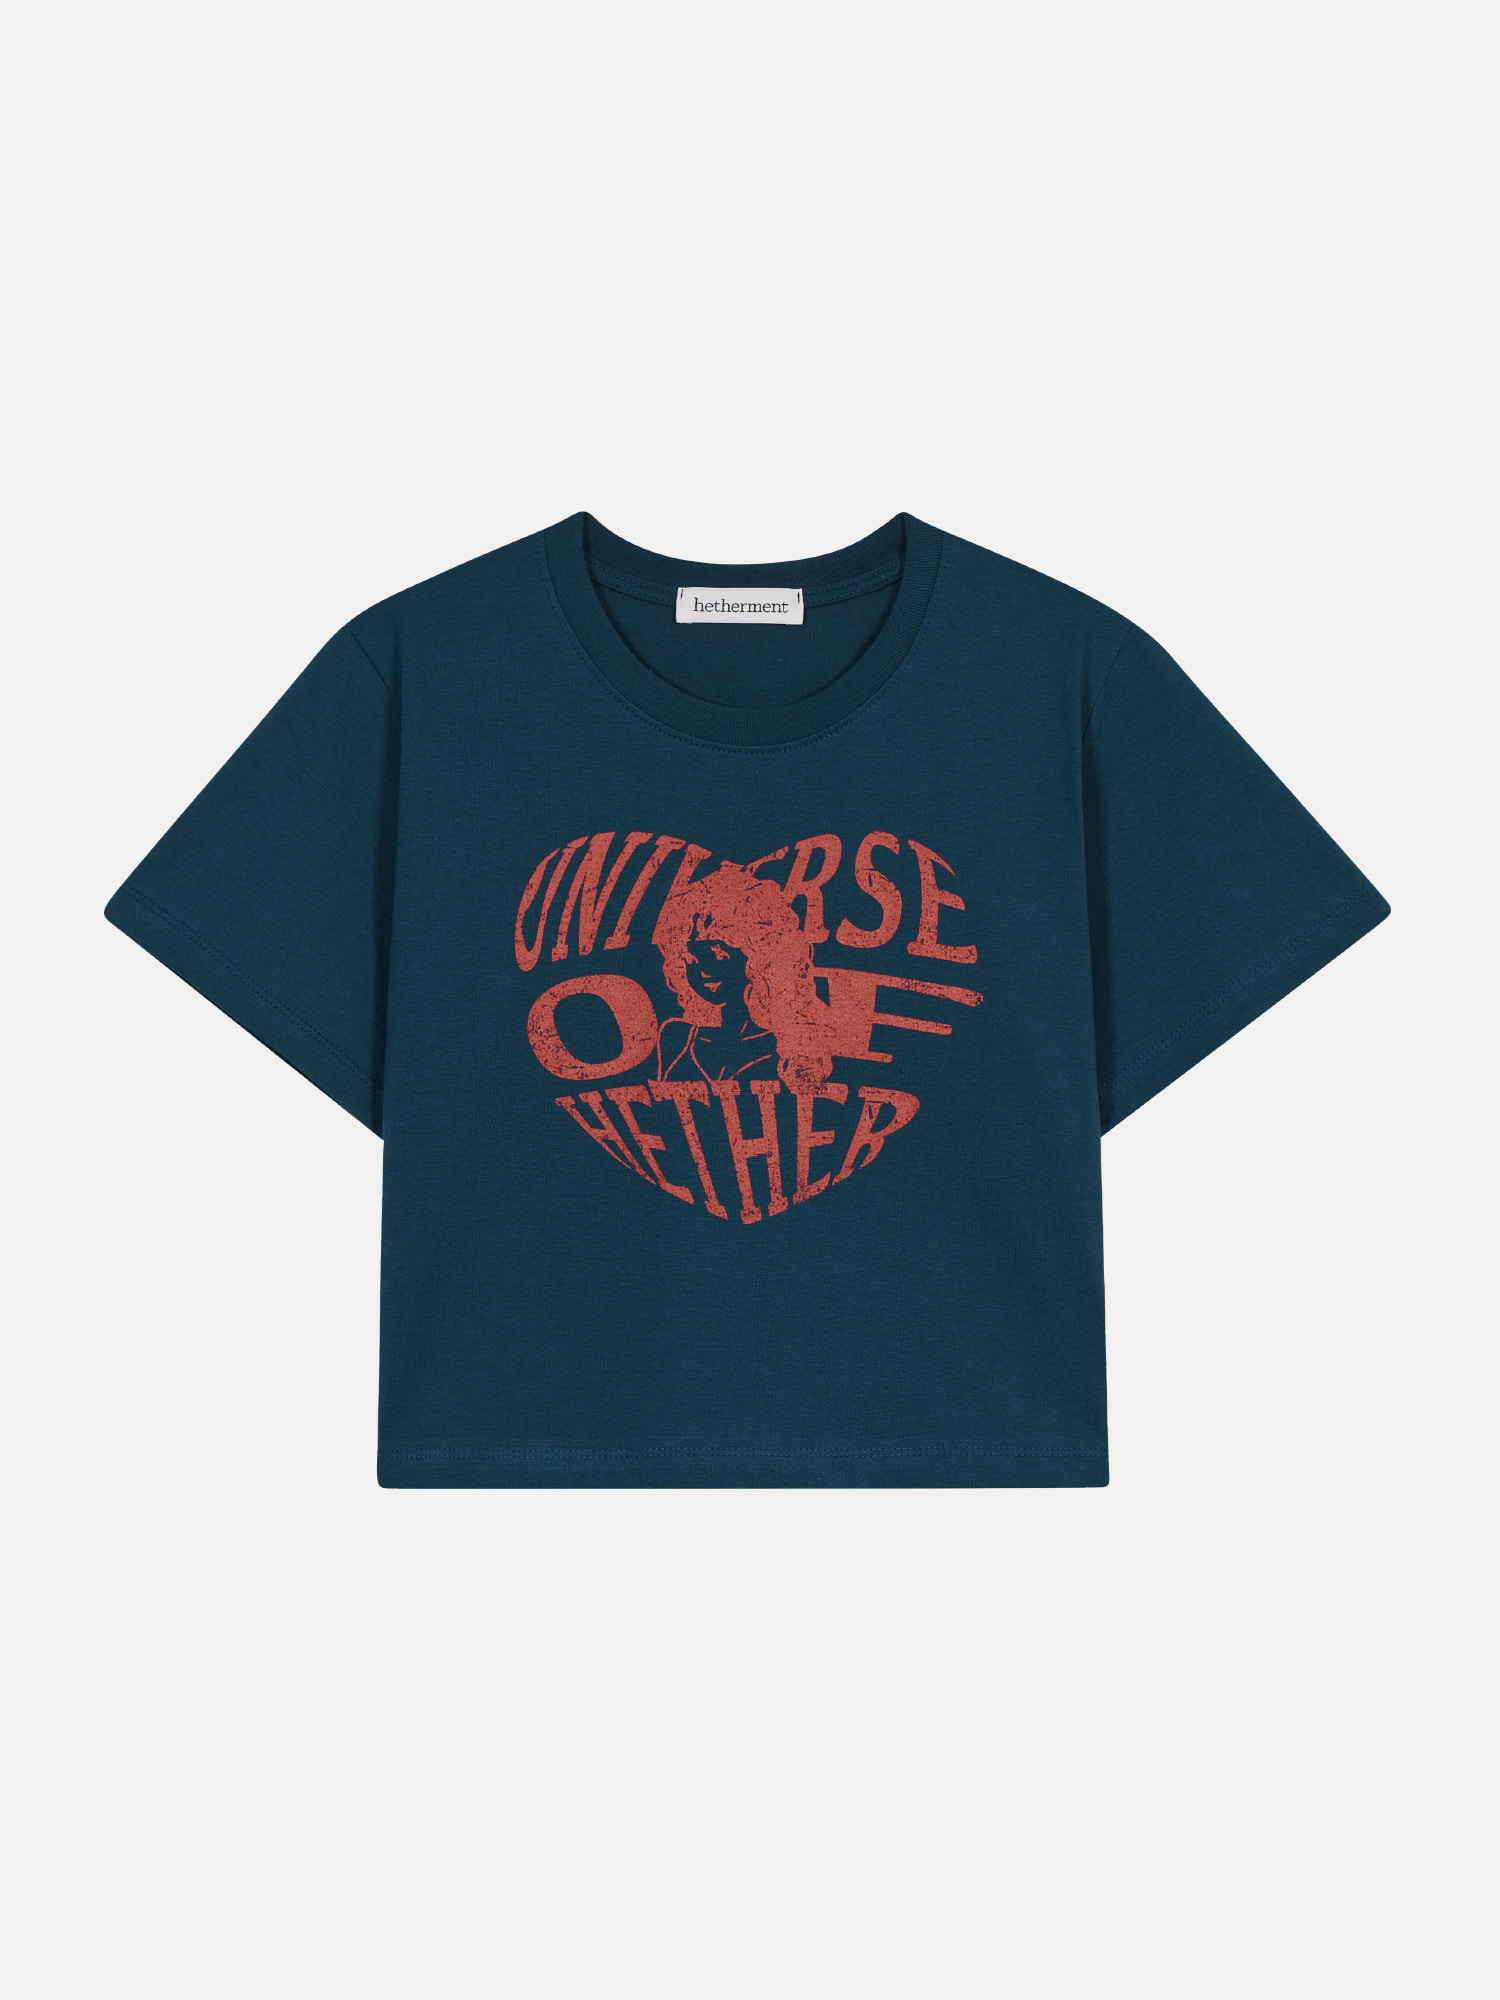 universe of hether crop t-shirts (navy)